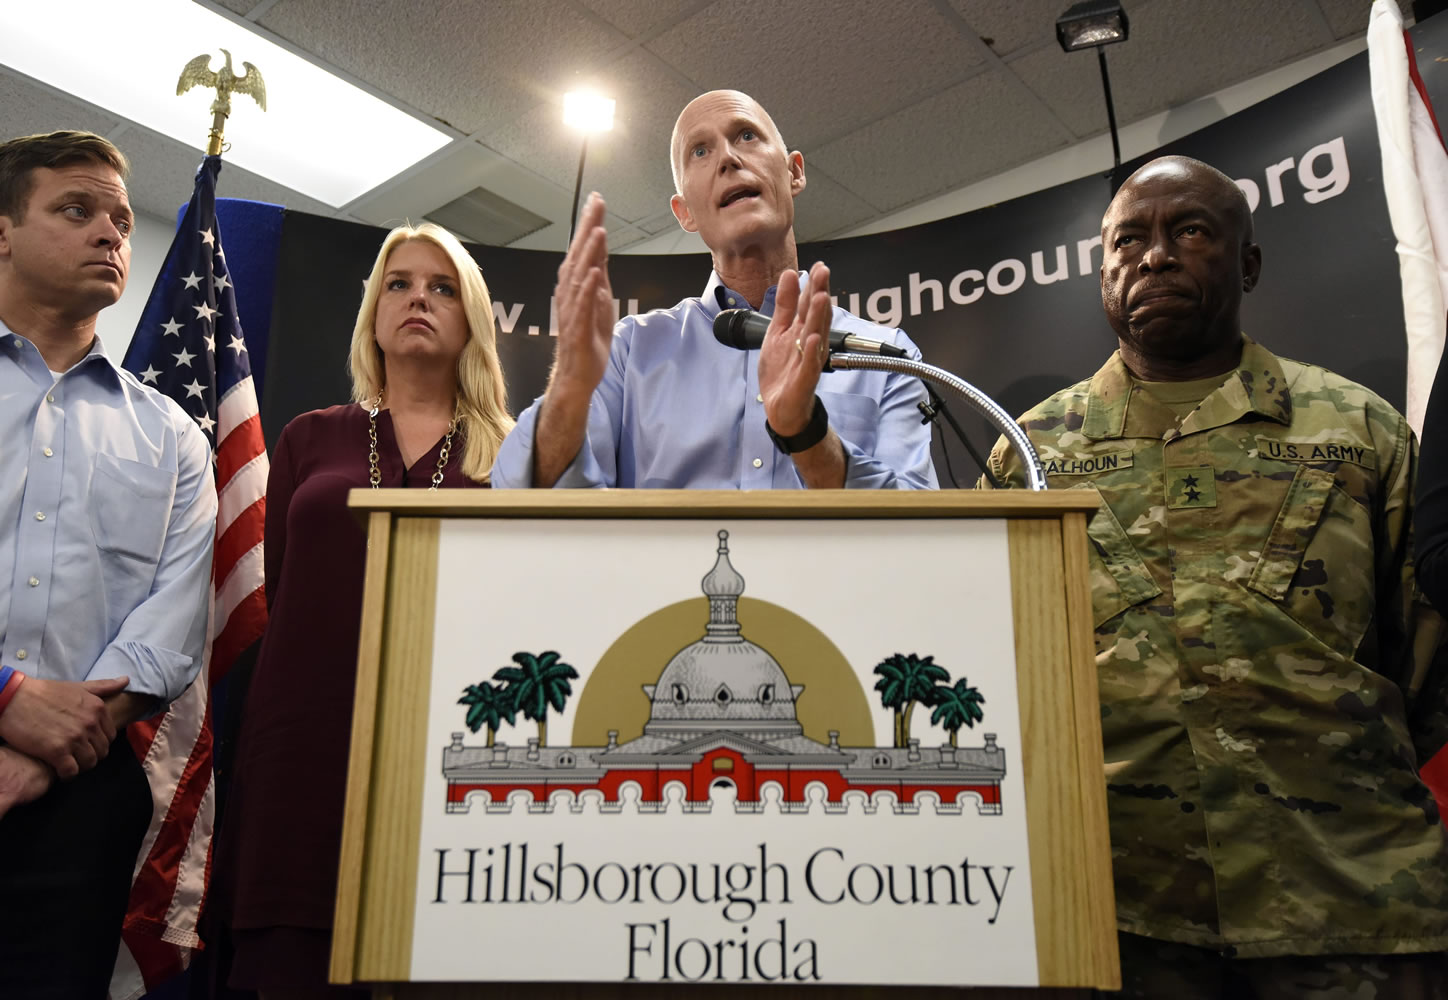 Gov. Rick Scott speaks accompanied by Florida Attorney General Pam Bondi, Lt. Gov. Carlos Lopez-Cantera, left, and Maj. General Michael Calhoun, right, during a news conference at the Hillsborough County Emergency Operations Center in Tampa, Fla. on Friday, Aug. 28, 2015. The governor and several local officials were on hand at the county E.O.C. to discuss Tropical Storm Erika and its possible impact on the state. (Chris Urso/The Tampa Tribune via AP)  ST.